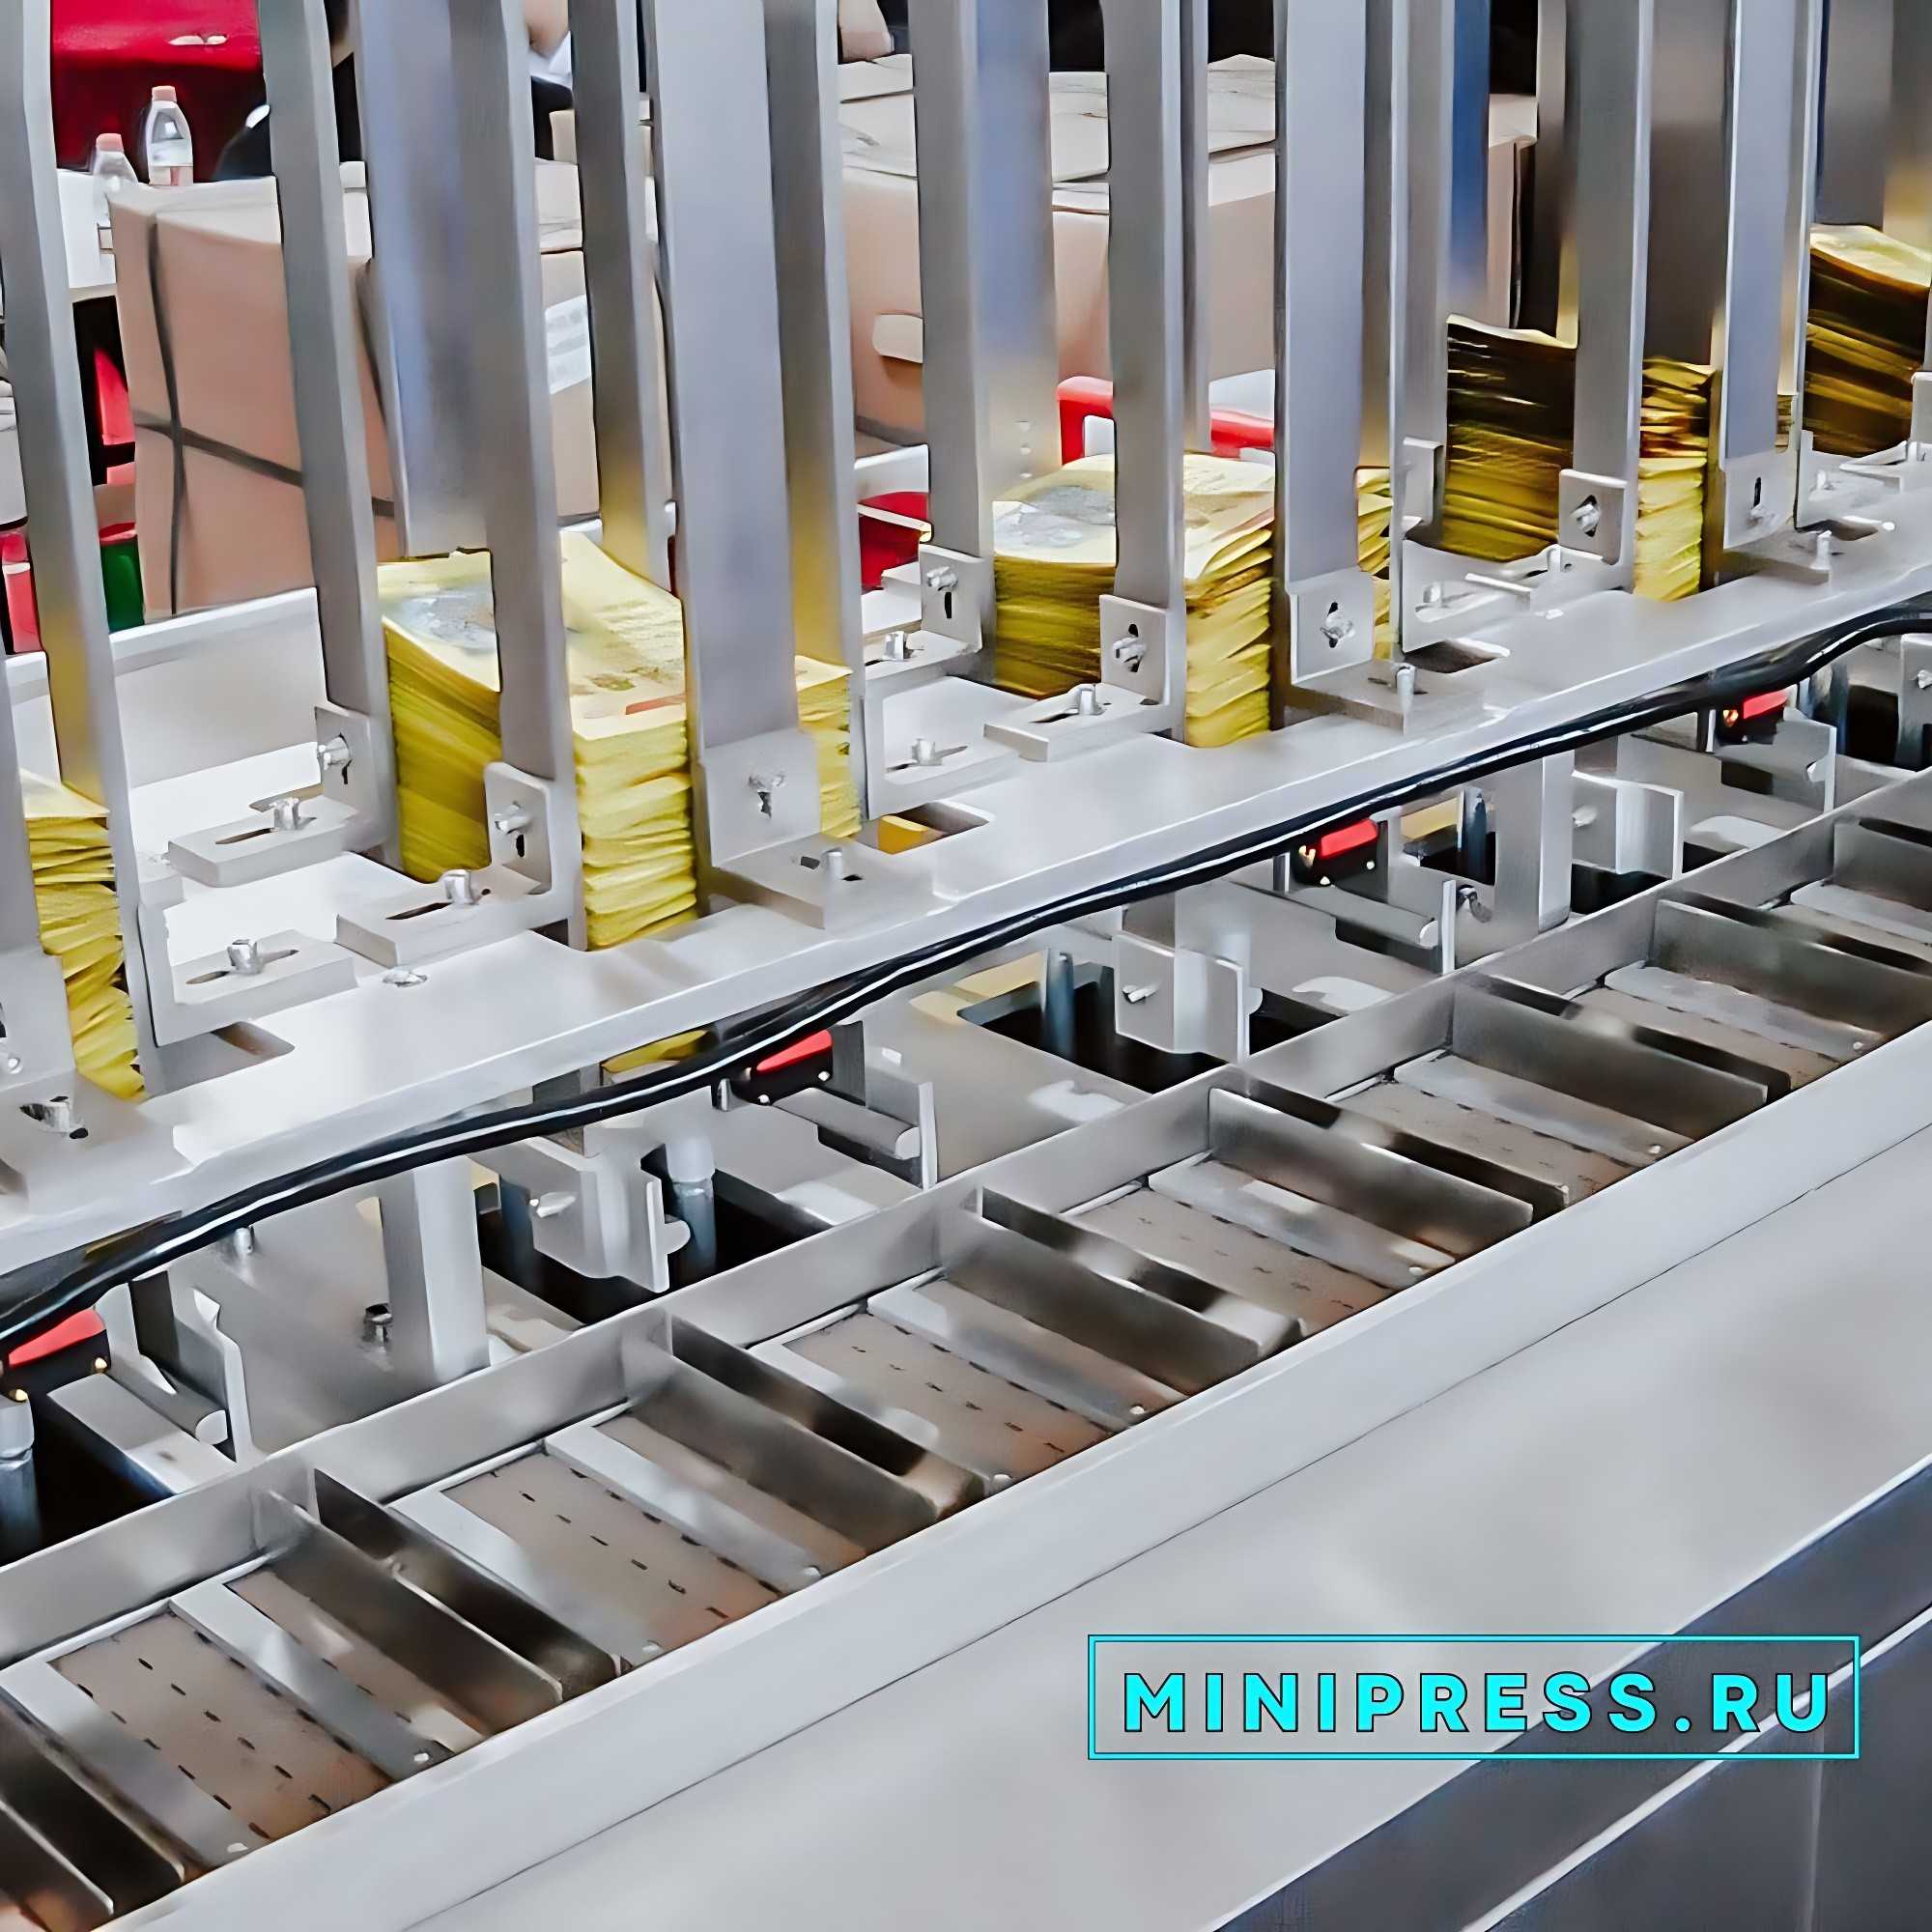 in the production of tablets to obtain a certain mass, the filler is used